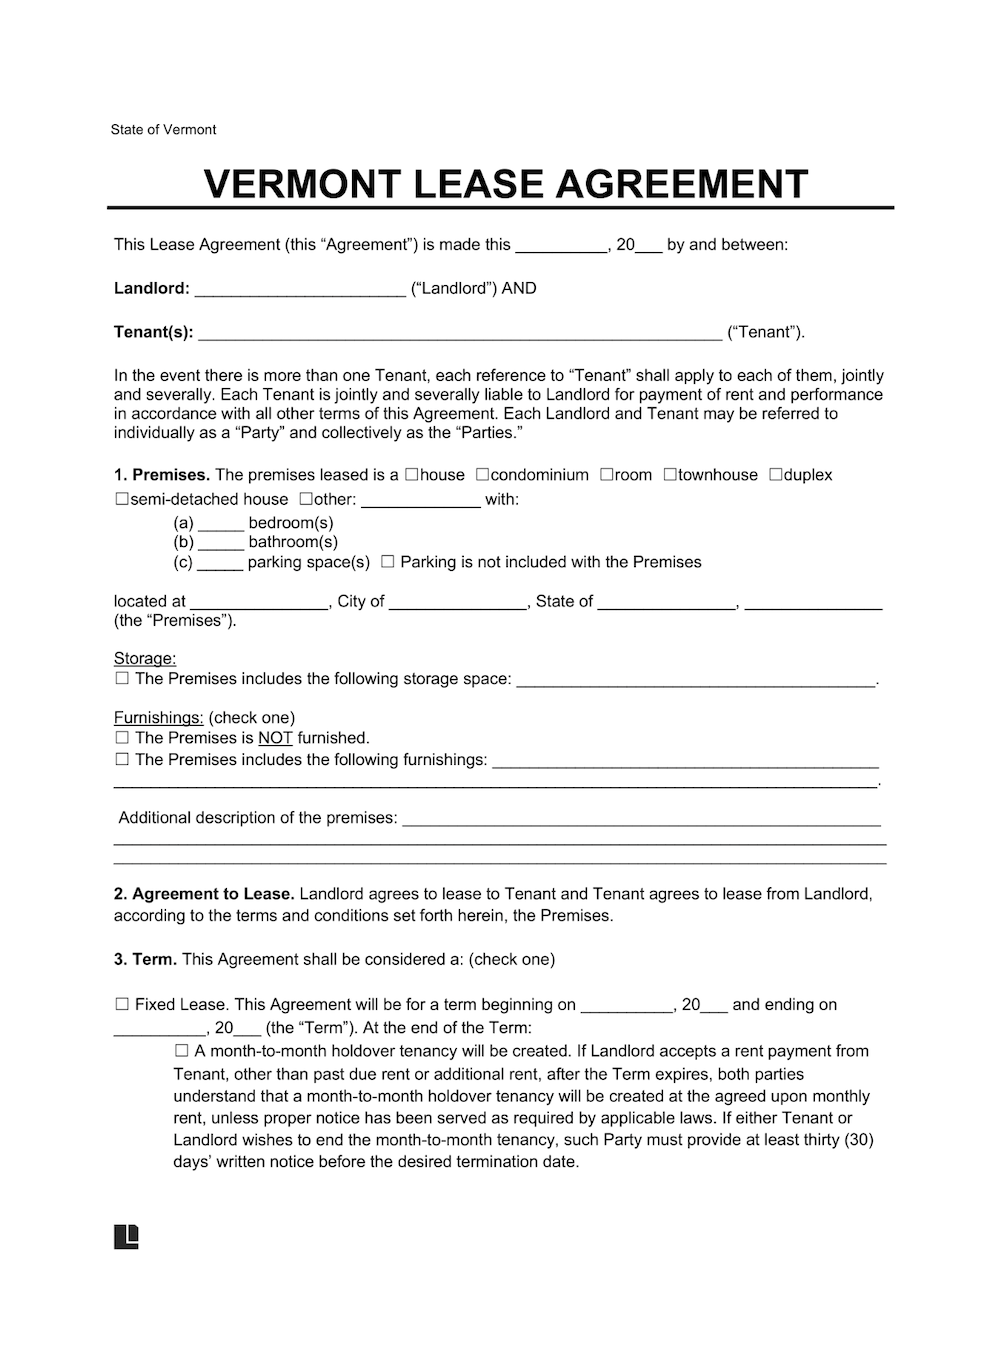 LegalTemplates Vermont Residential Lease Agreement